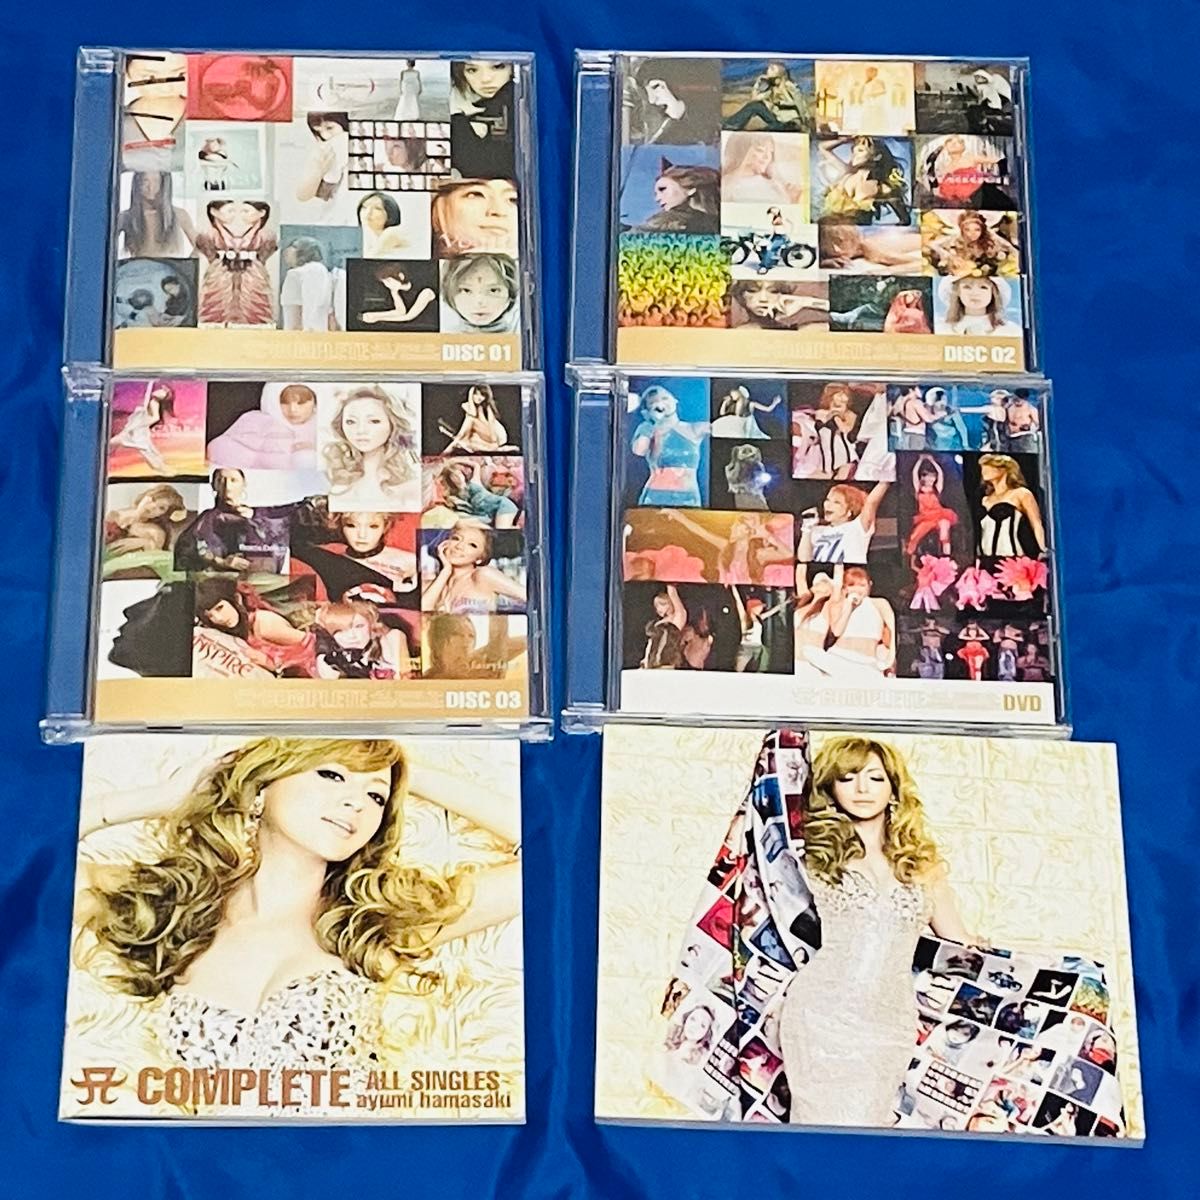 【DVD付パッケージ】 浜崎あゆみ A COMPLETE ~ ALL SINGLES ~ M Dearest Voyage